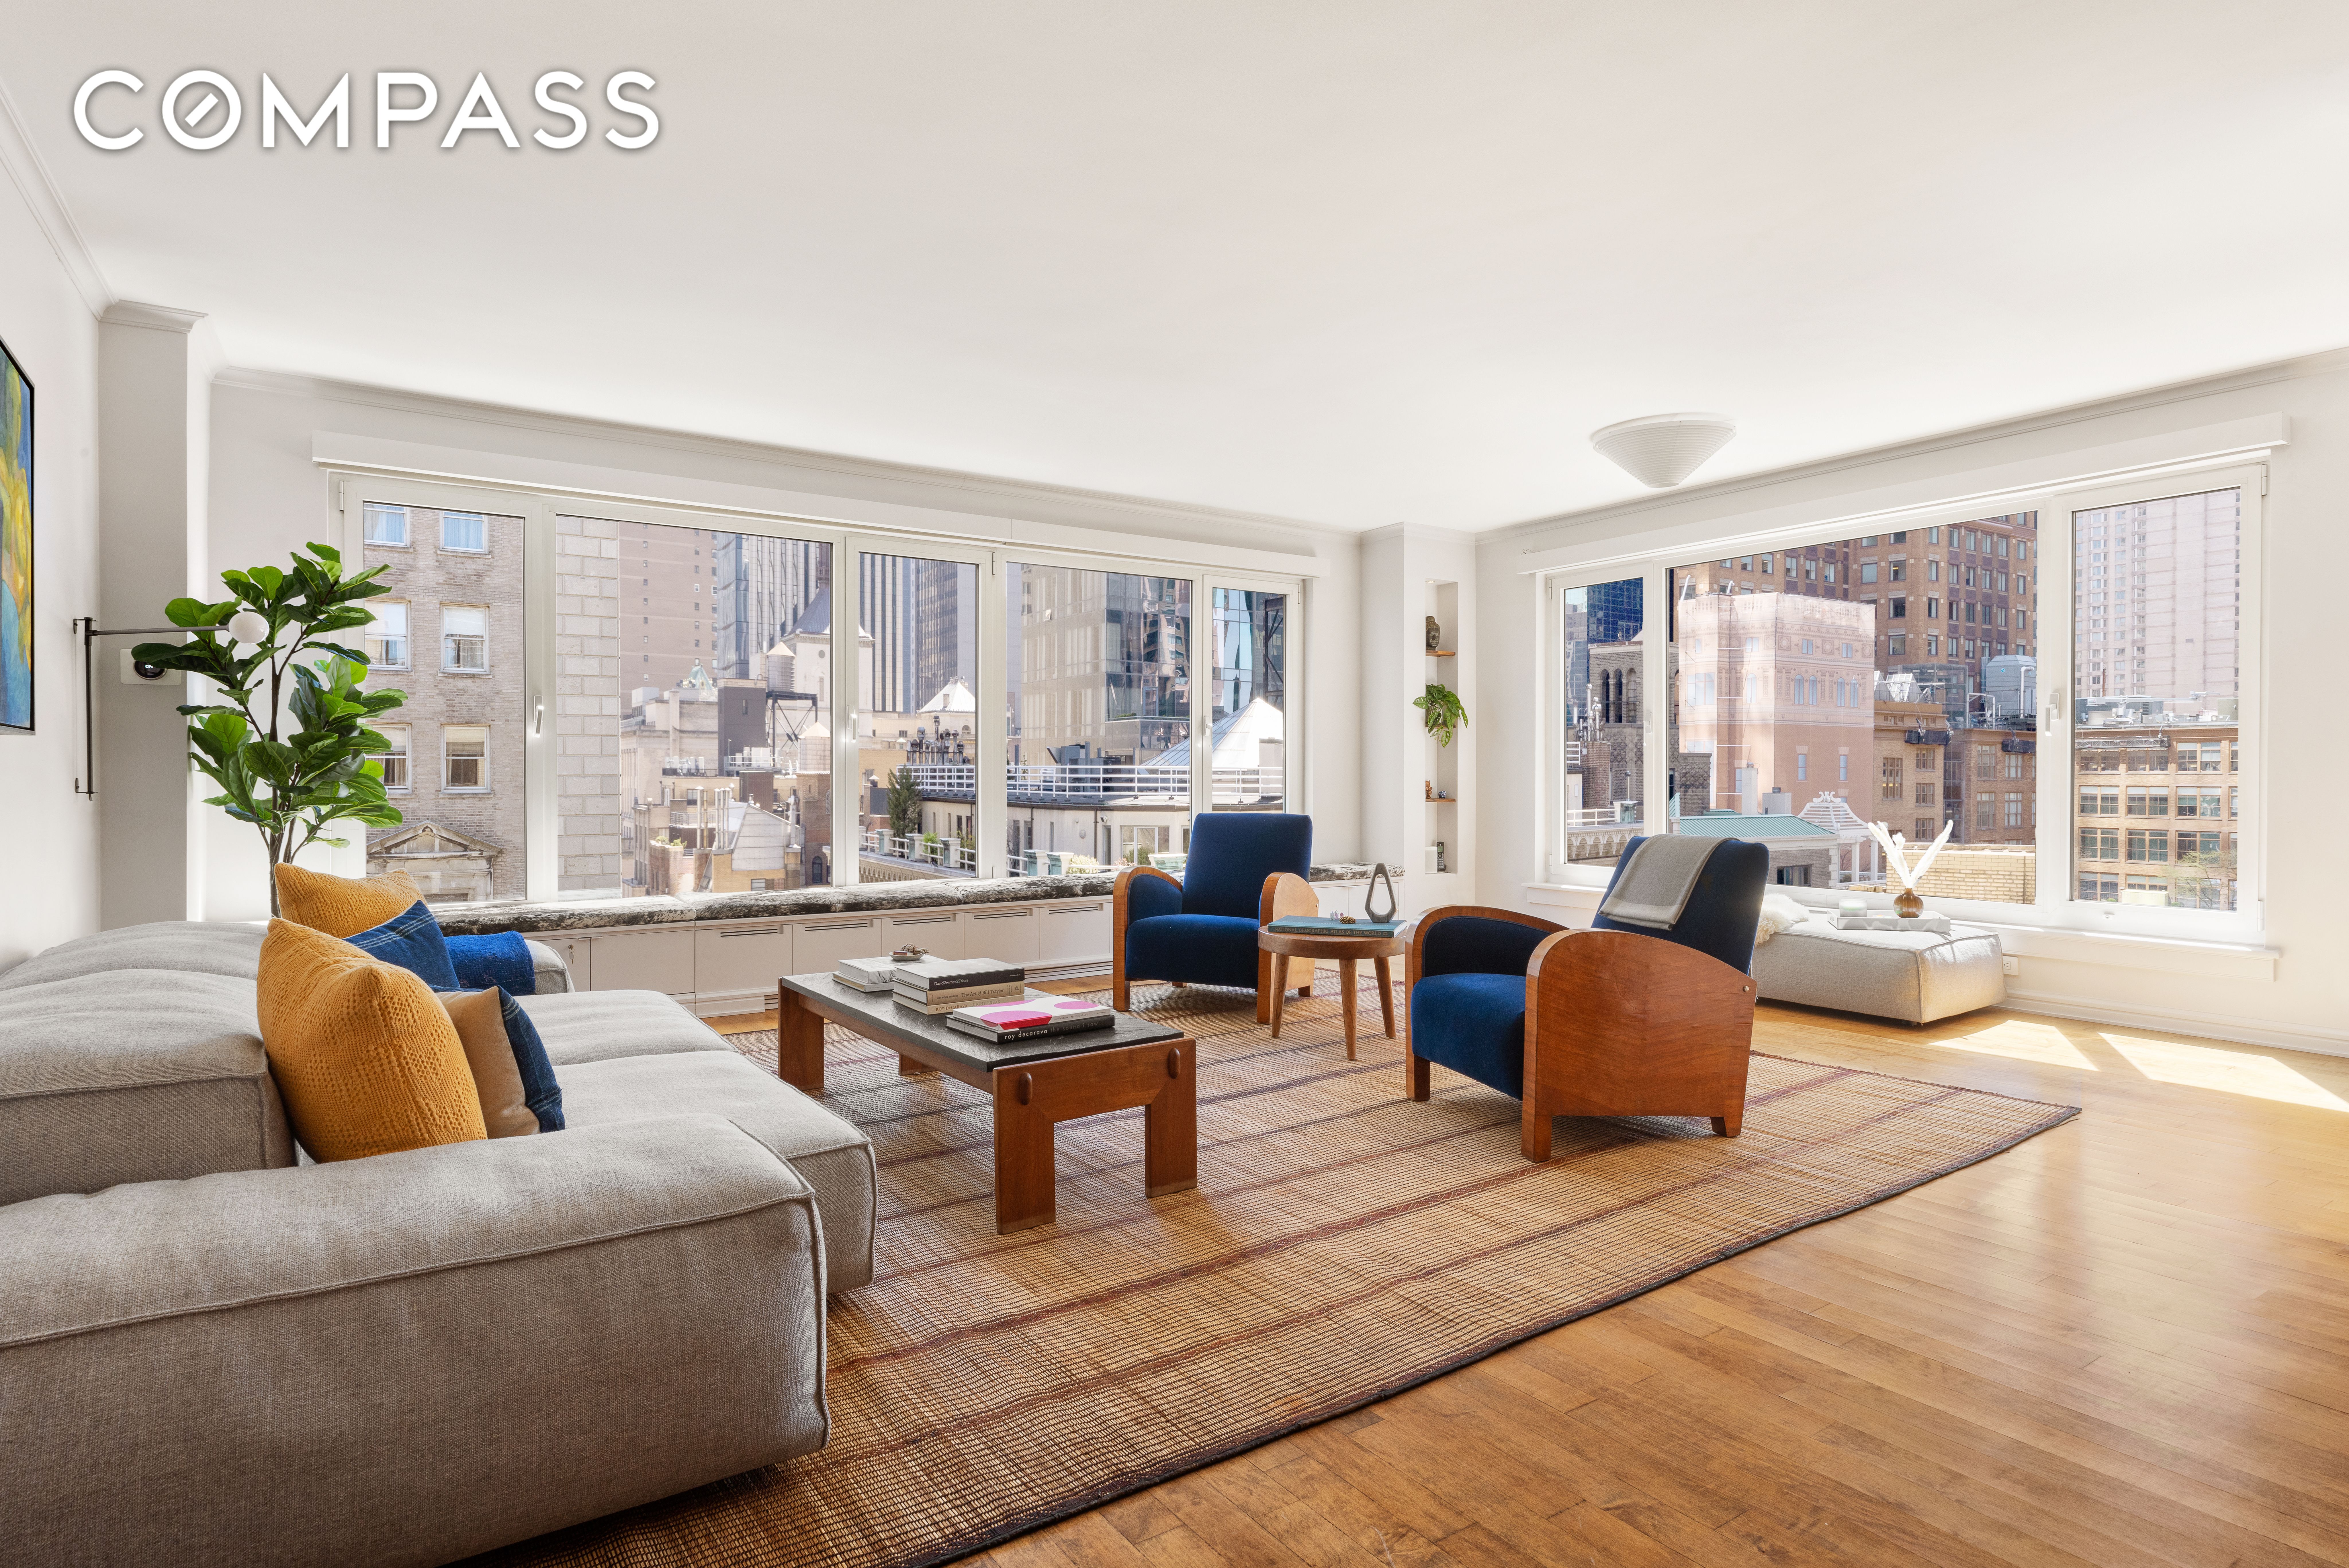 200 Central Park 20J, Central Park South, Midtown West, NYC - 2 Bedrooms  
2.5 Bathrooms  
7 Rooms - 